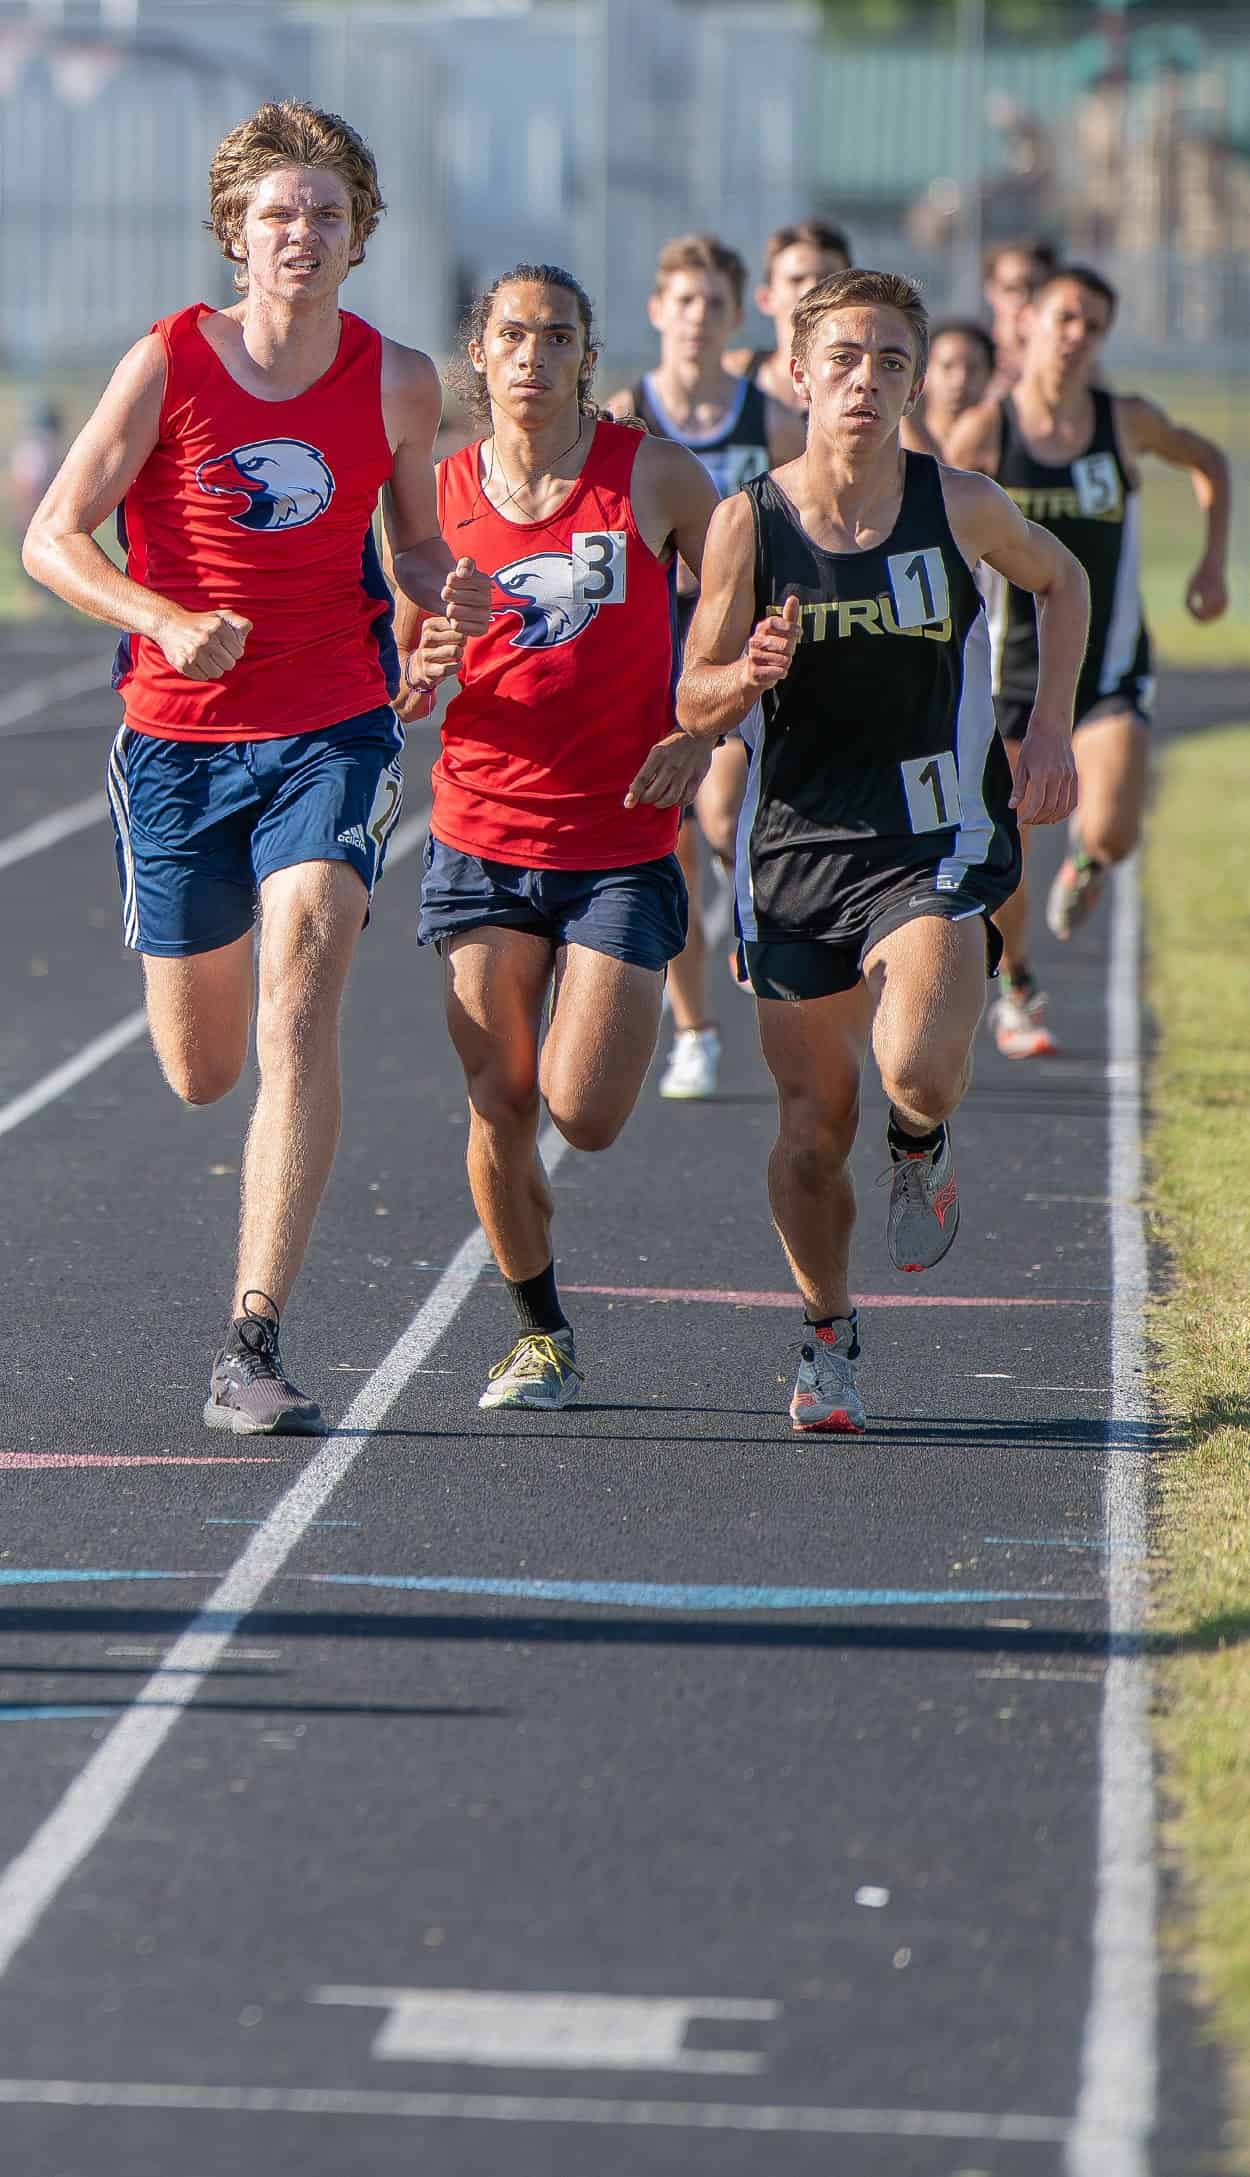 Springstead’s Isaac Rosario, 3, eventually overcame fellow Springstead competitor Zachary McCollum and Citrus High’s Miles Tobin to win the Men’s 1600 at the GC8 Track and Field Championships at Weeki Wachee High School. Photo by [Joe DiCristofalo]